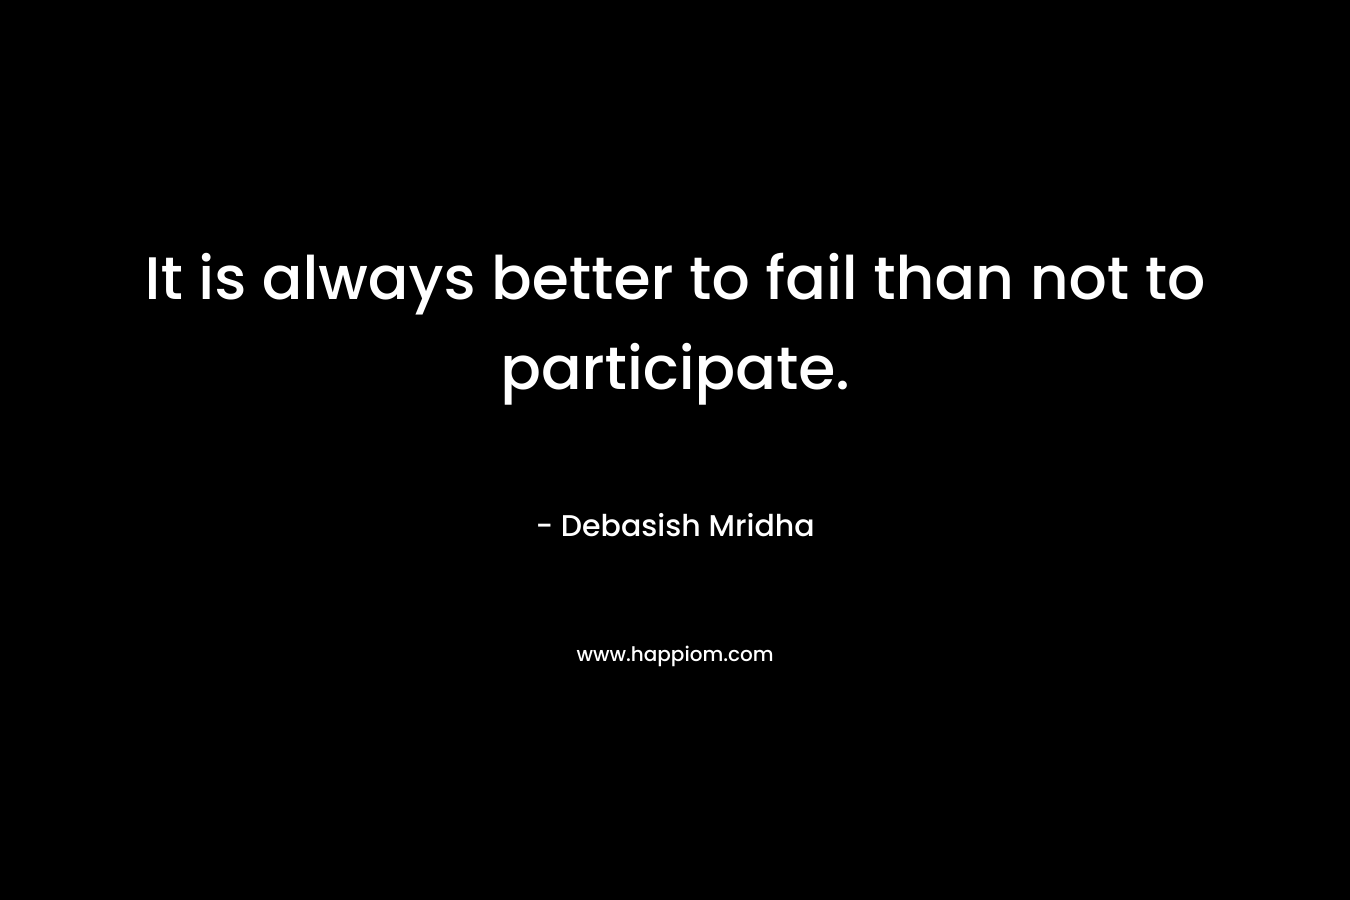 It is always better to fail than not to participate.